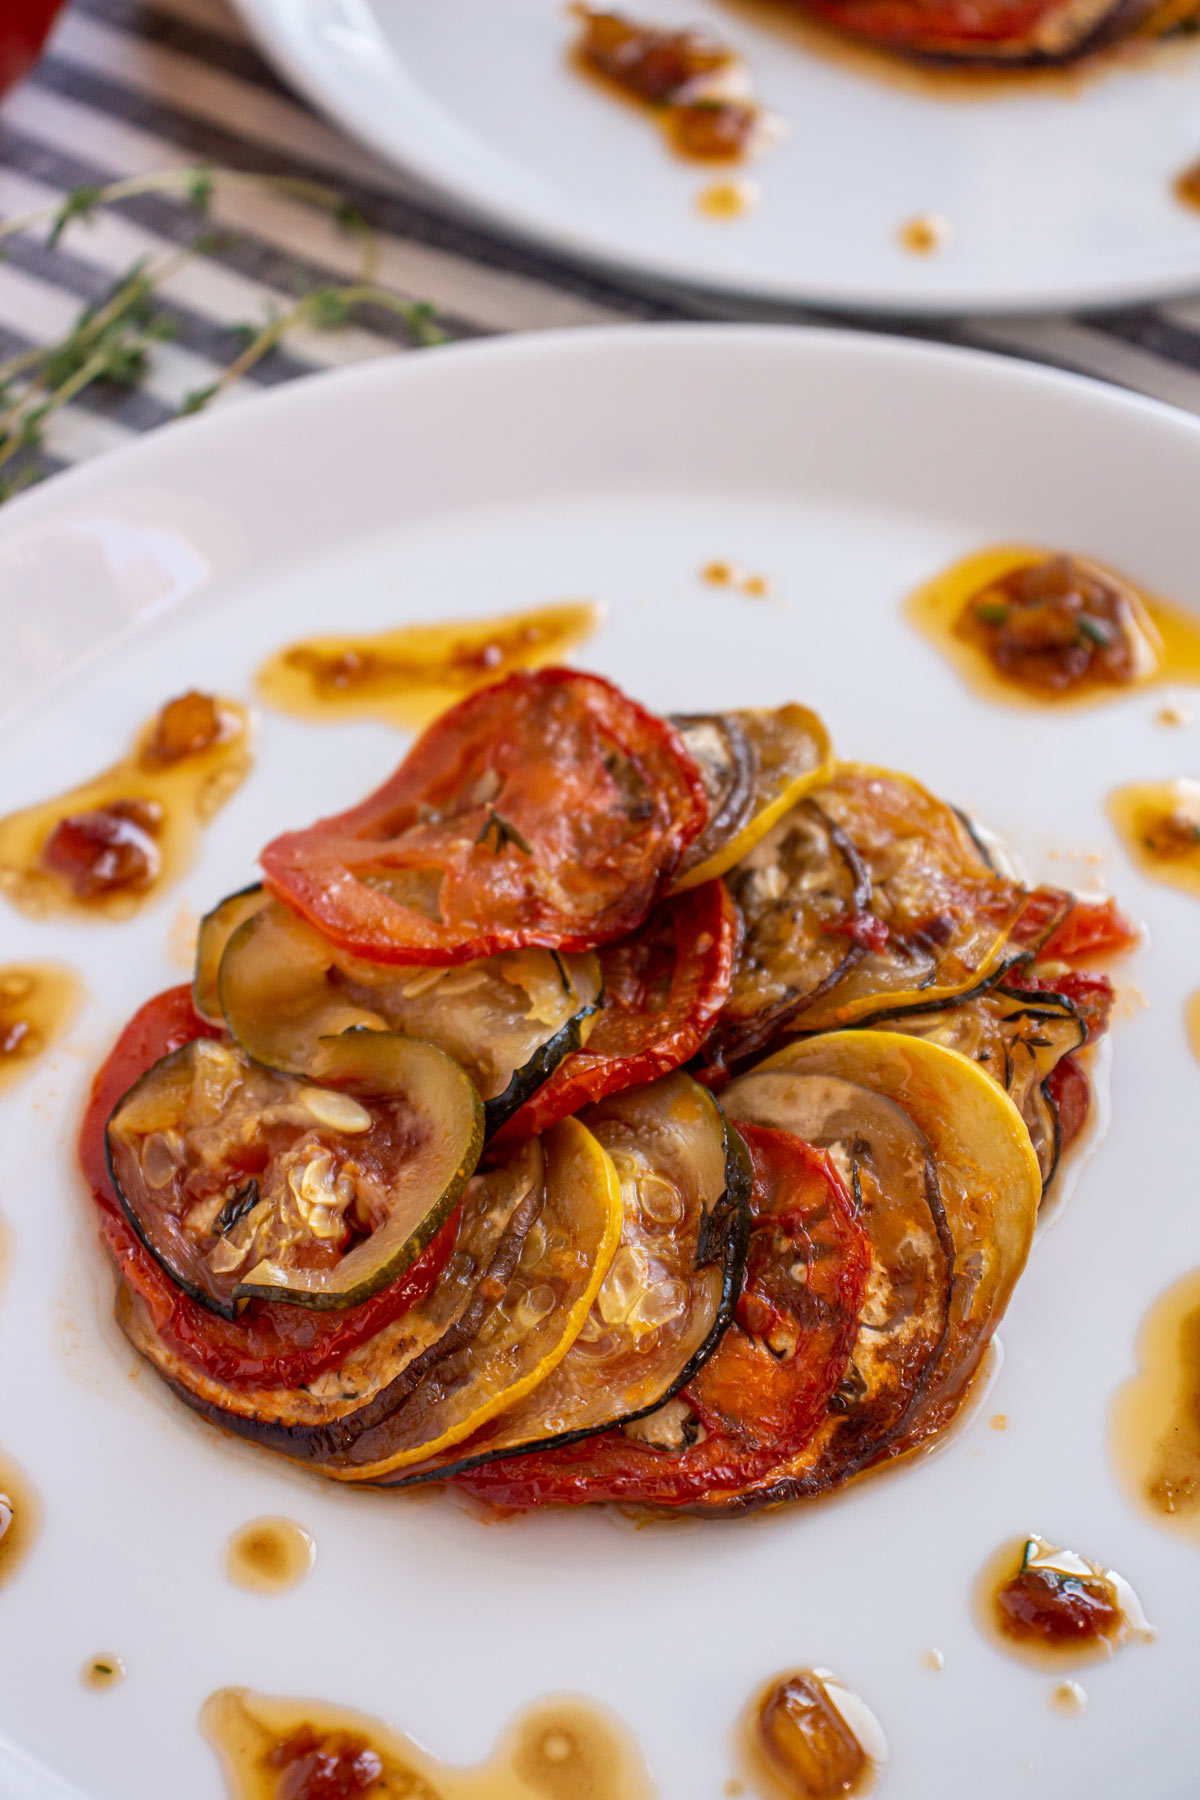 Ratatouille fanned into a circle on a white plate with a drizzle of vinaigrette around it.